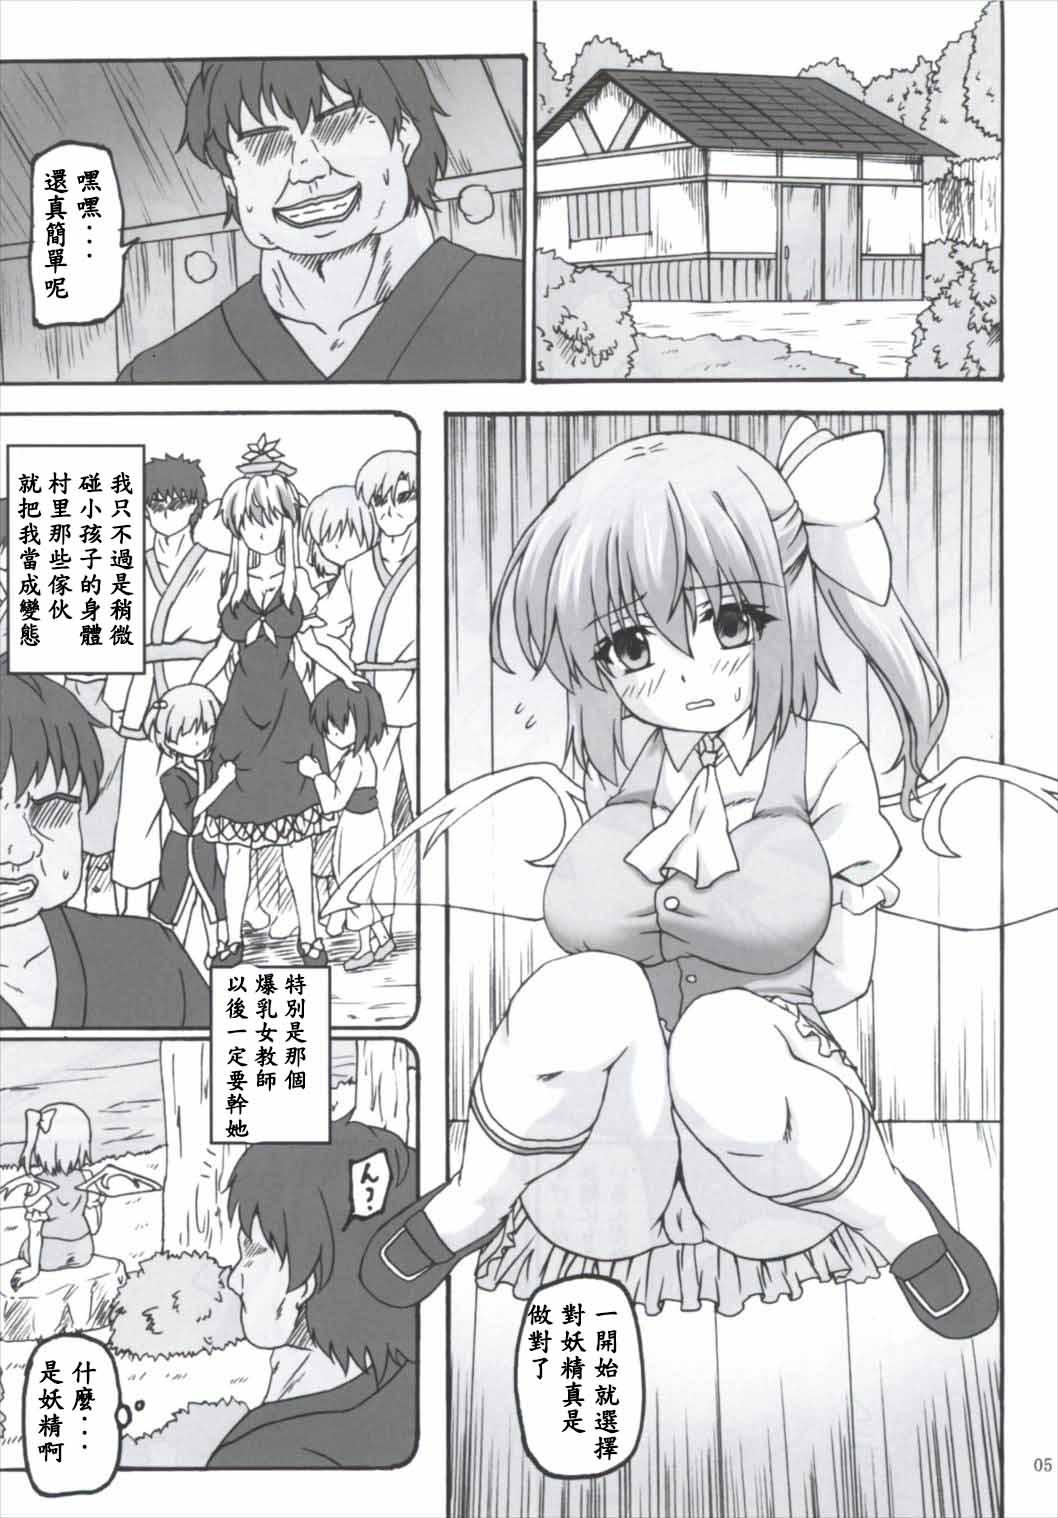 Oil Daiyousei Hyouhon - Touhou project Compilation - Page 5